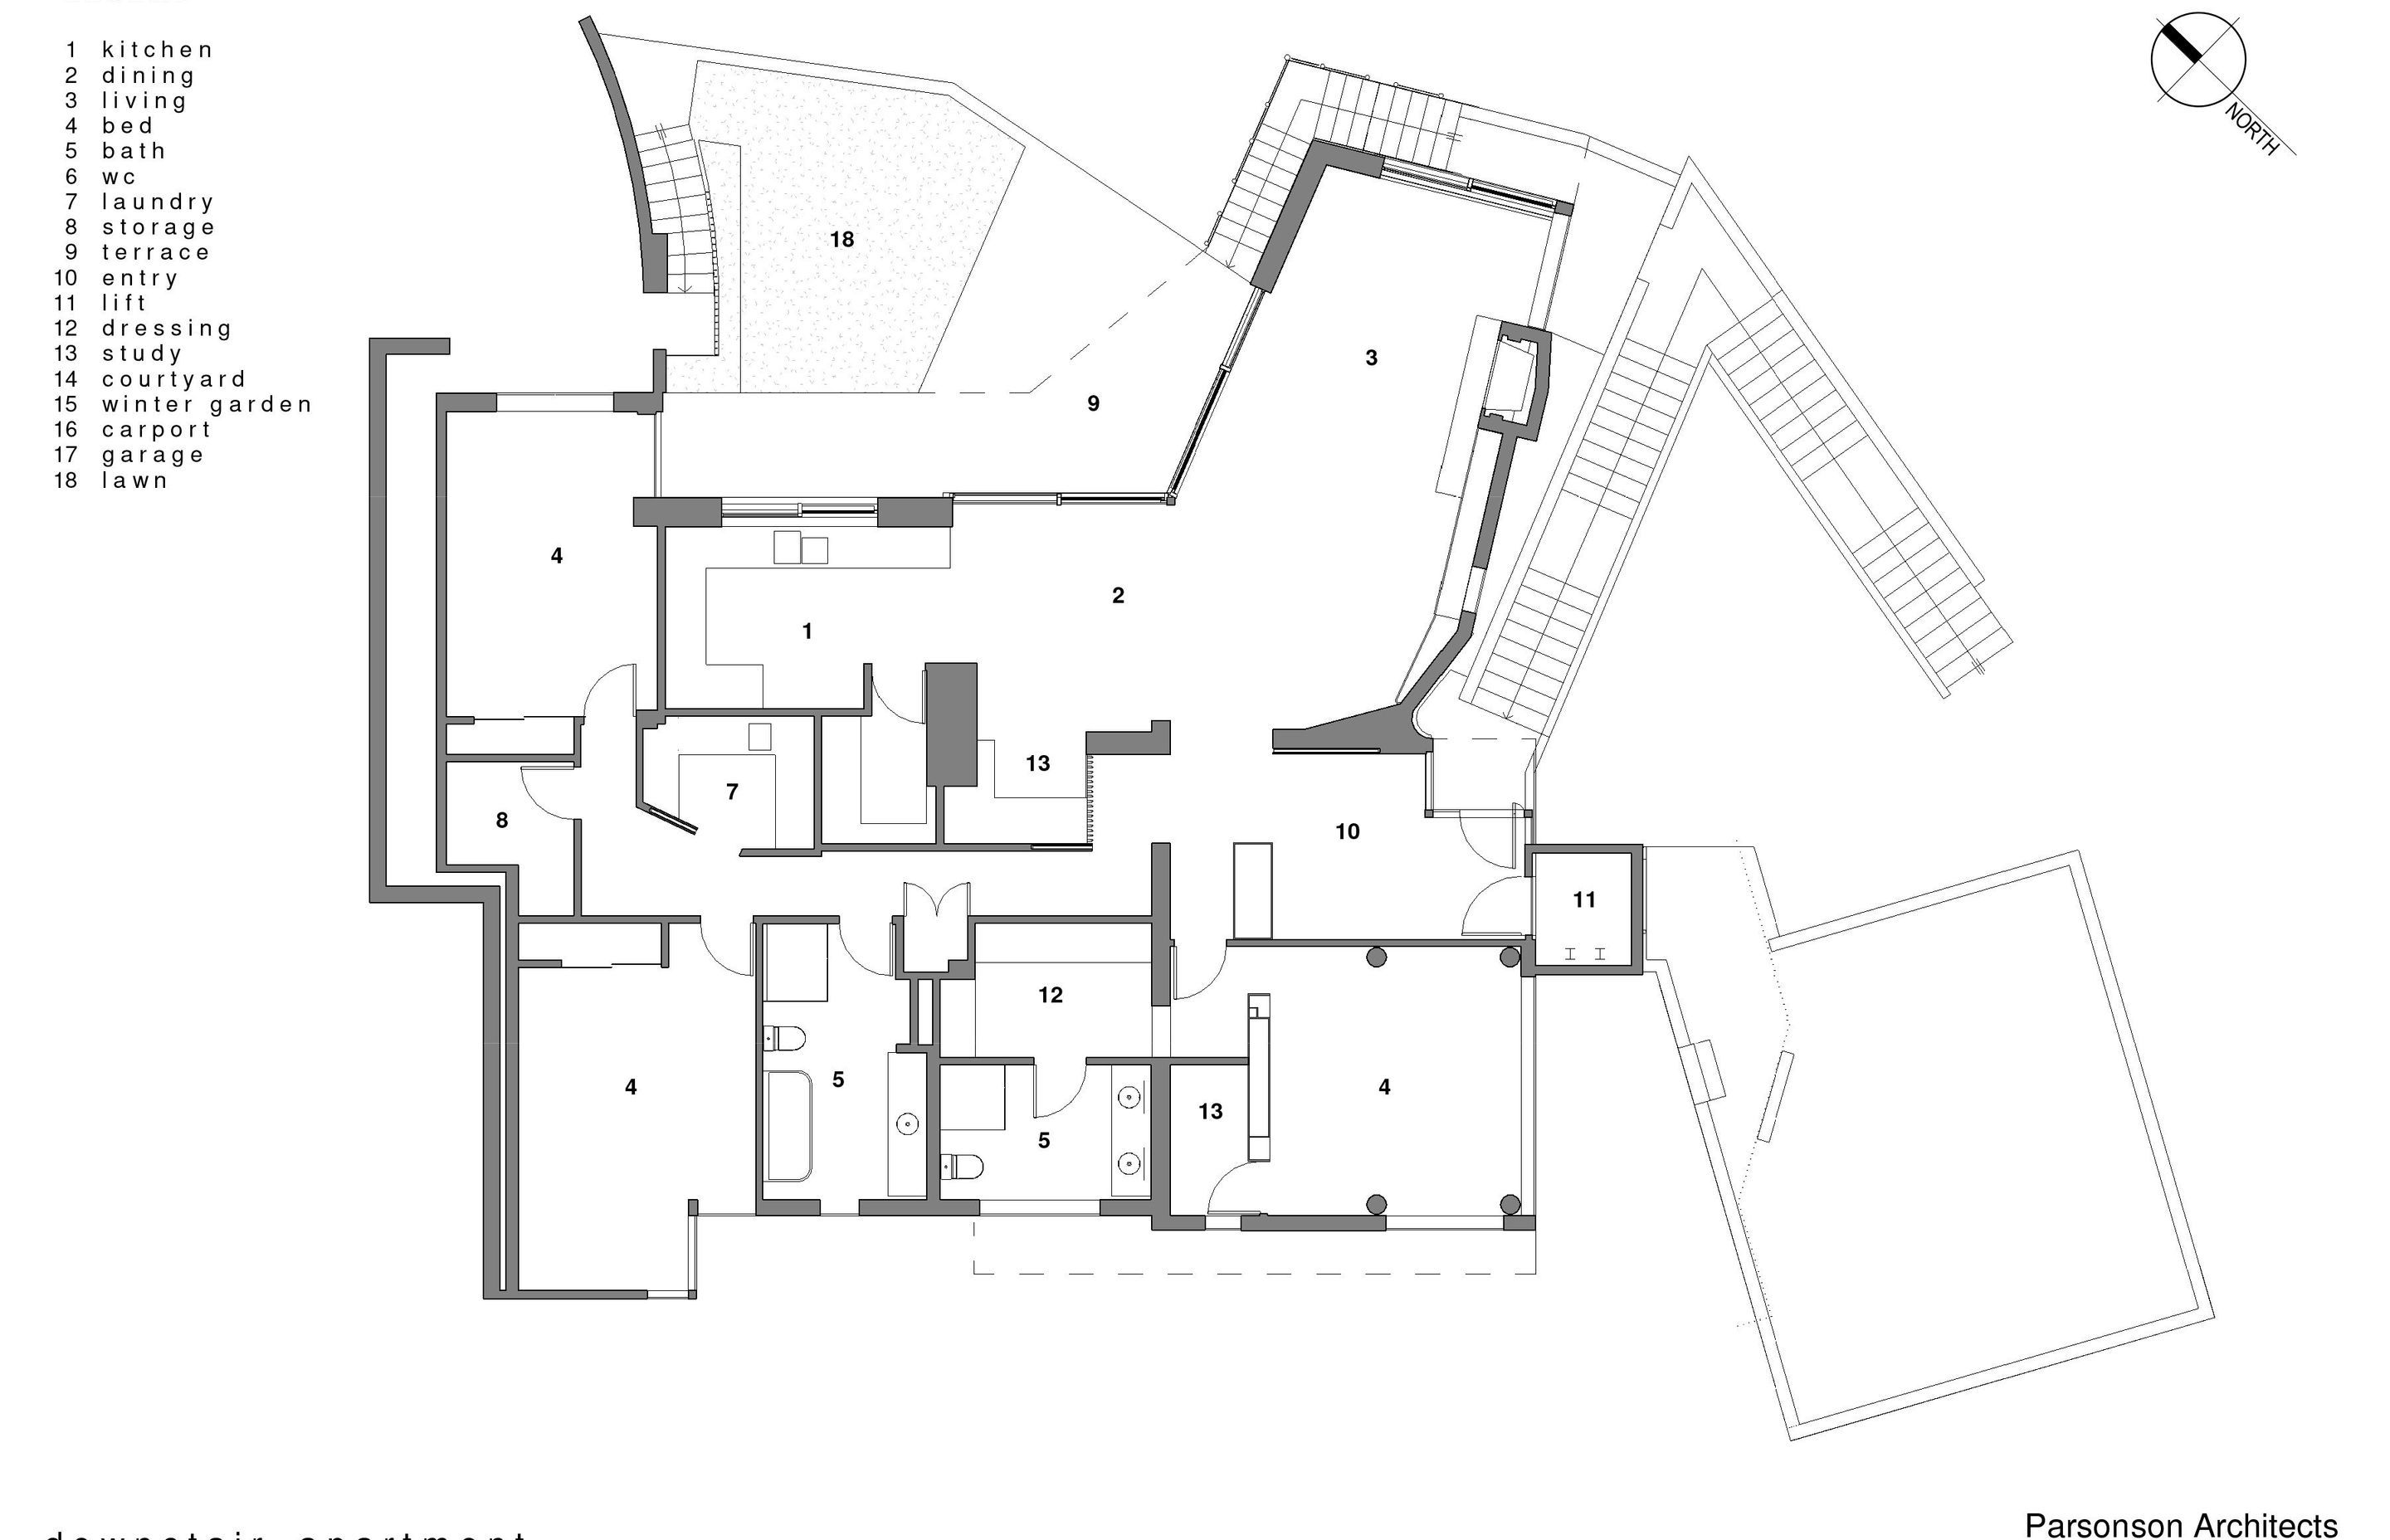 The plan for the downstairs apartment has a north-facing terrace (9) and lawn (18) extended out from the kitchen, diining and living area (3).